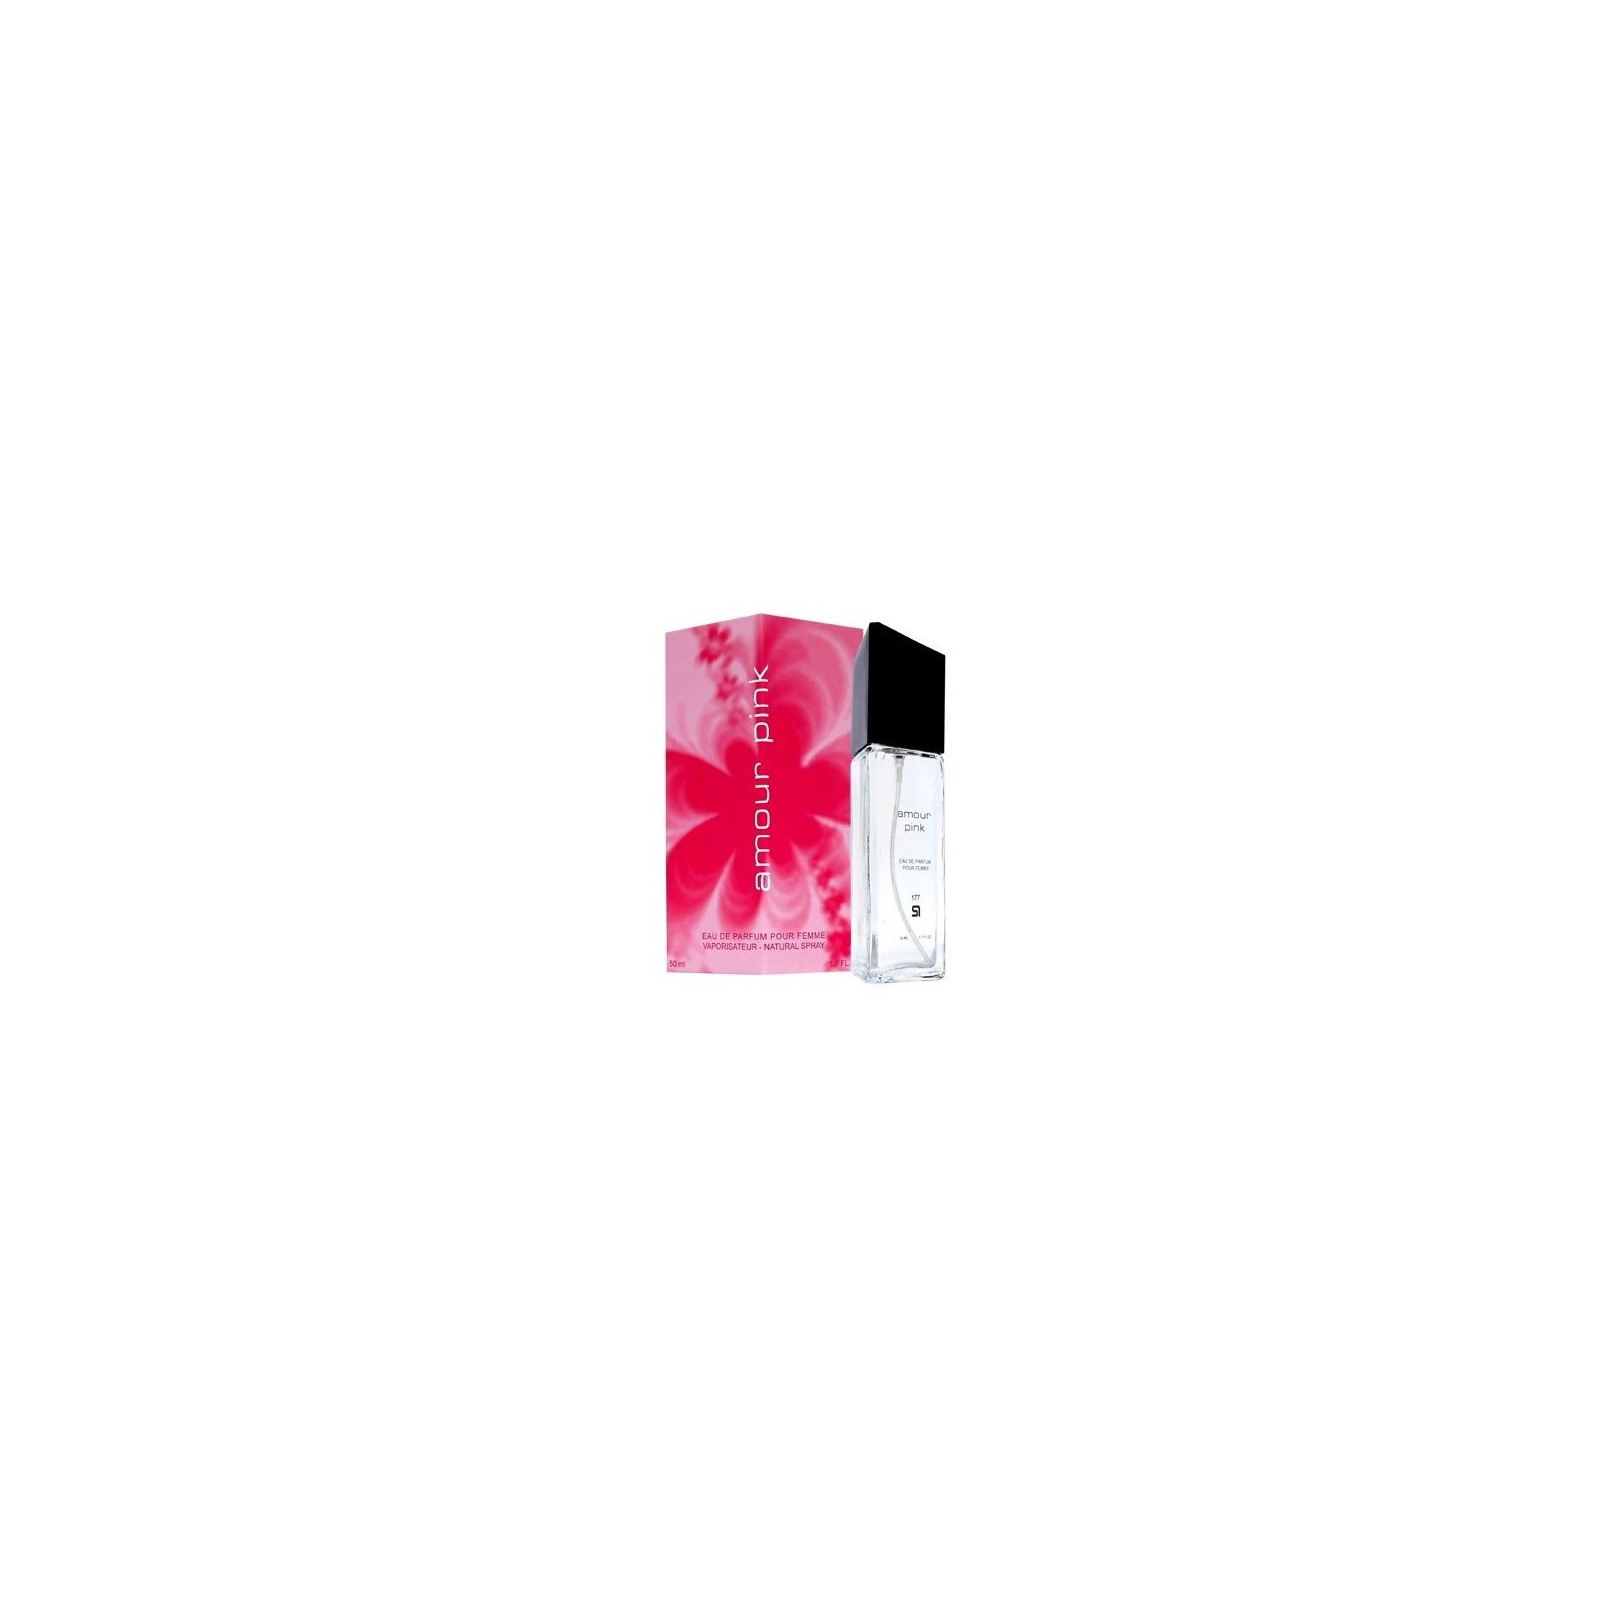 Perfume de mujer barato amour pink